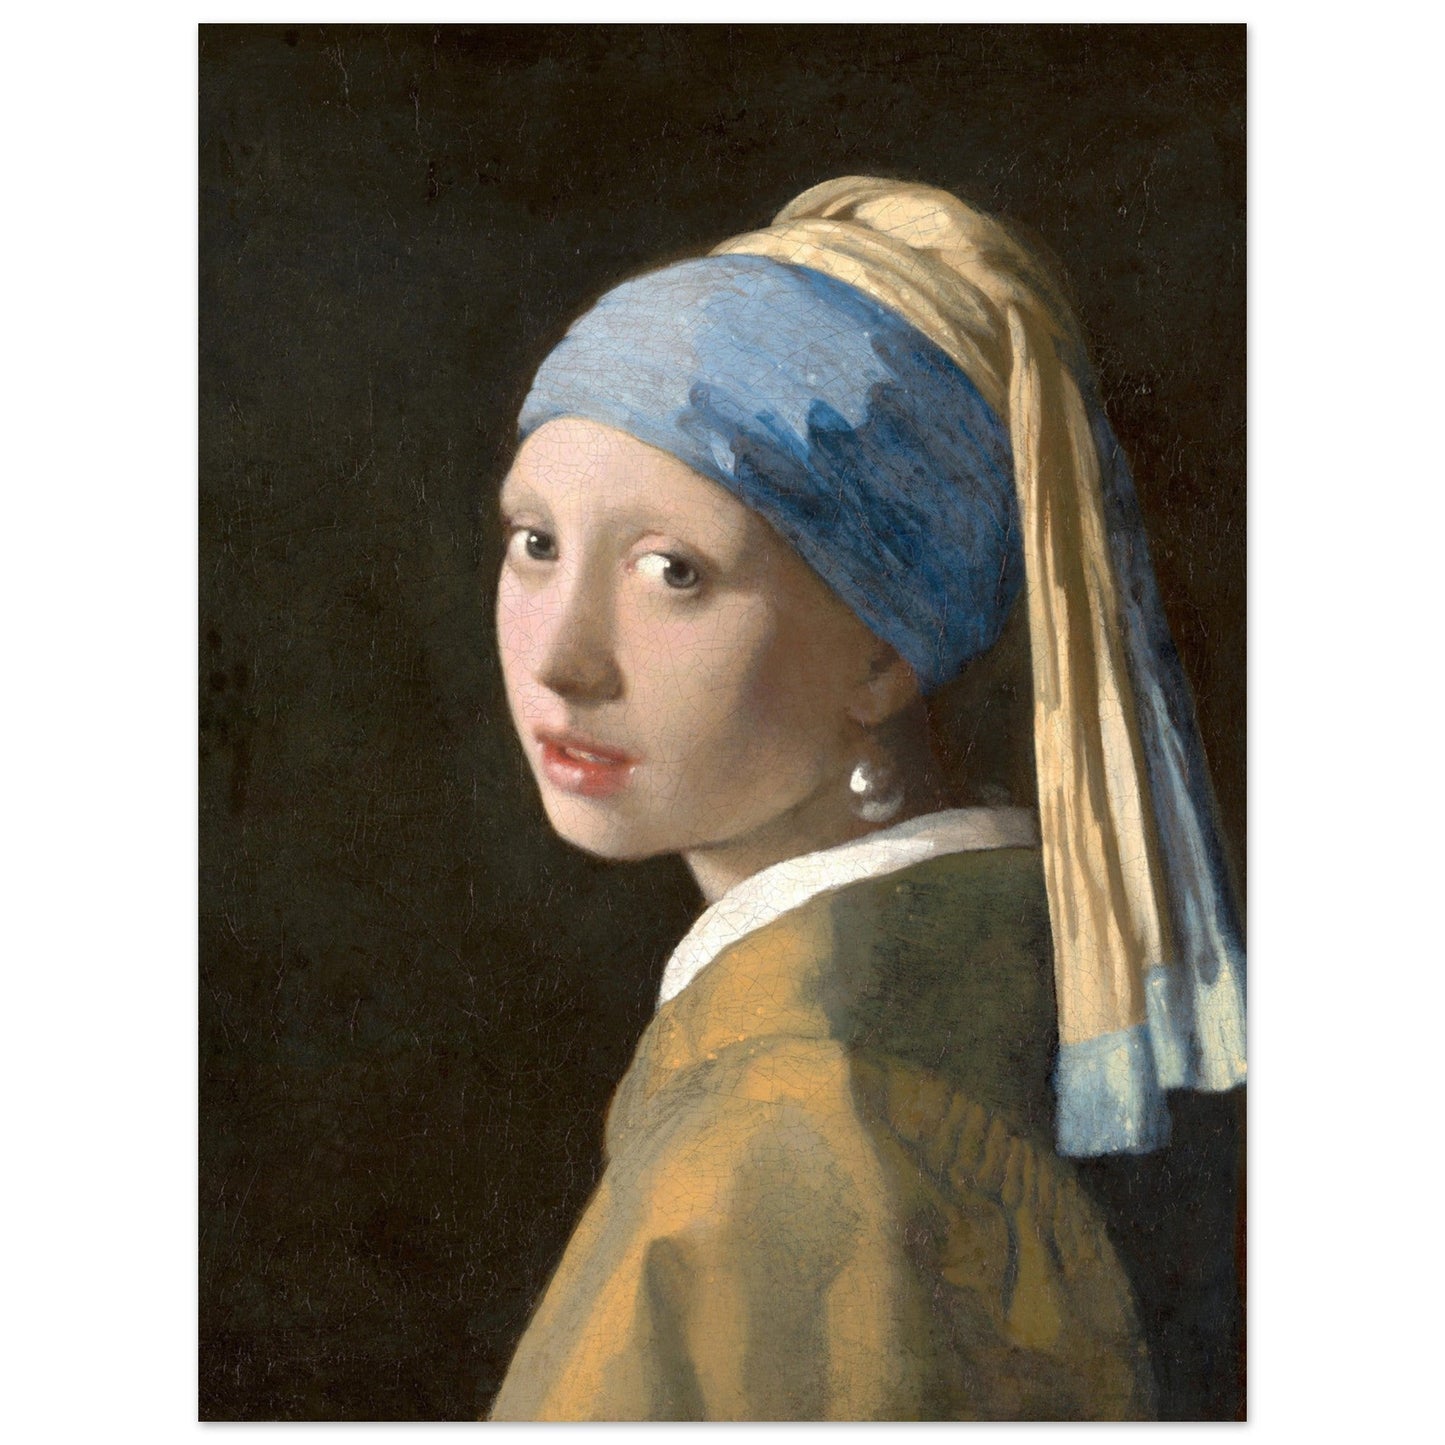 A colored wall art of the Girl with a Pearl Earring.